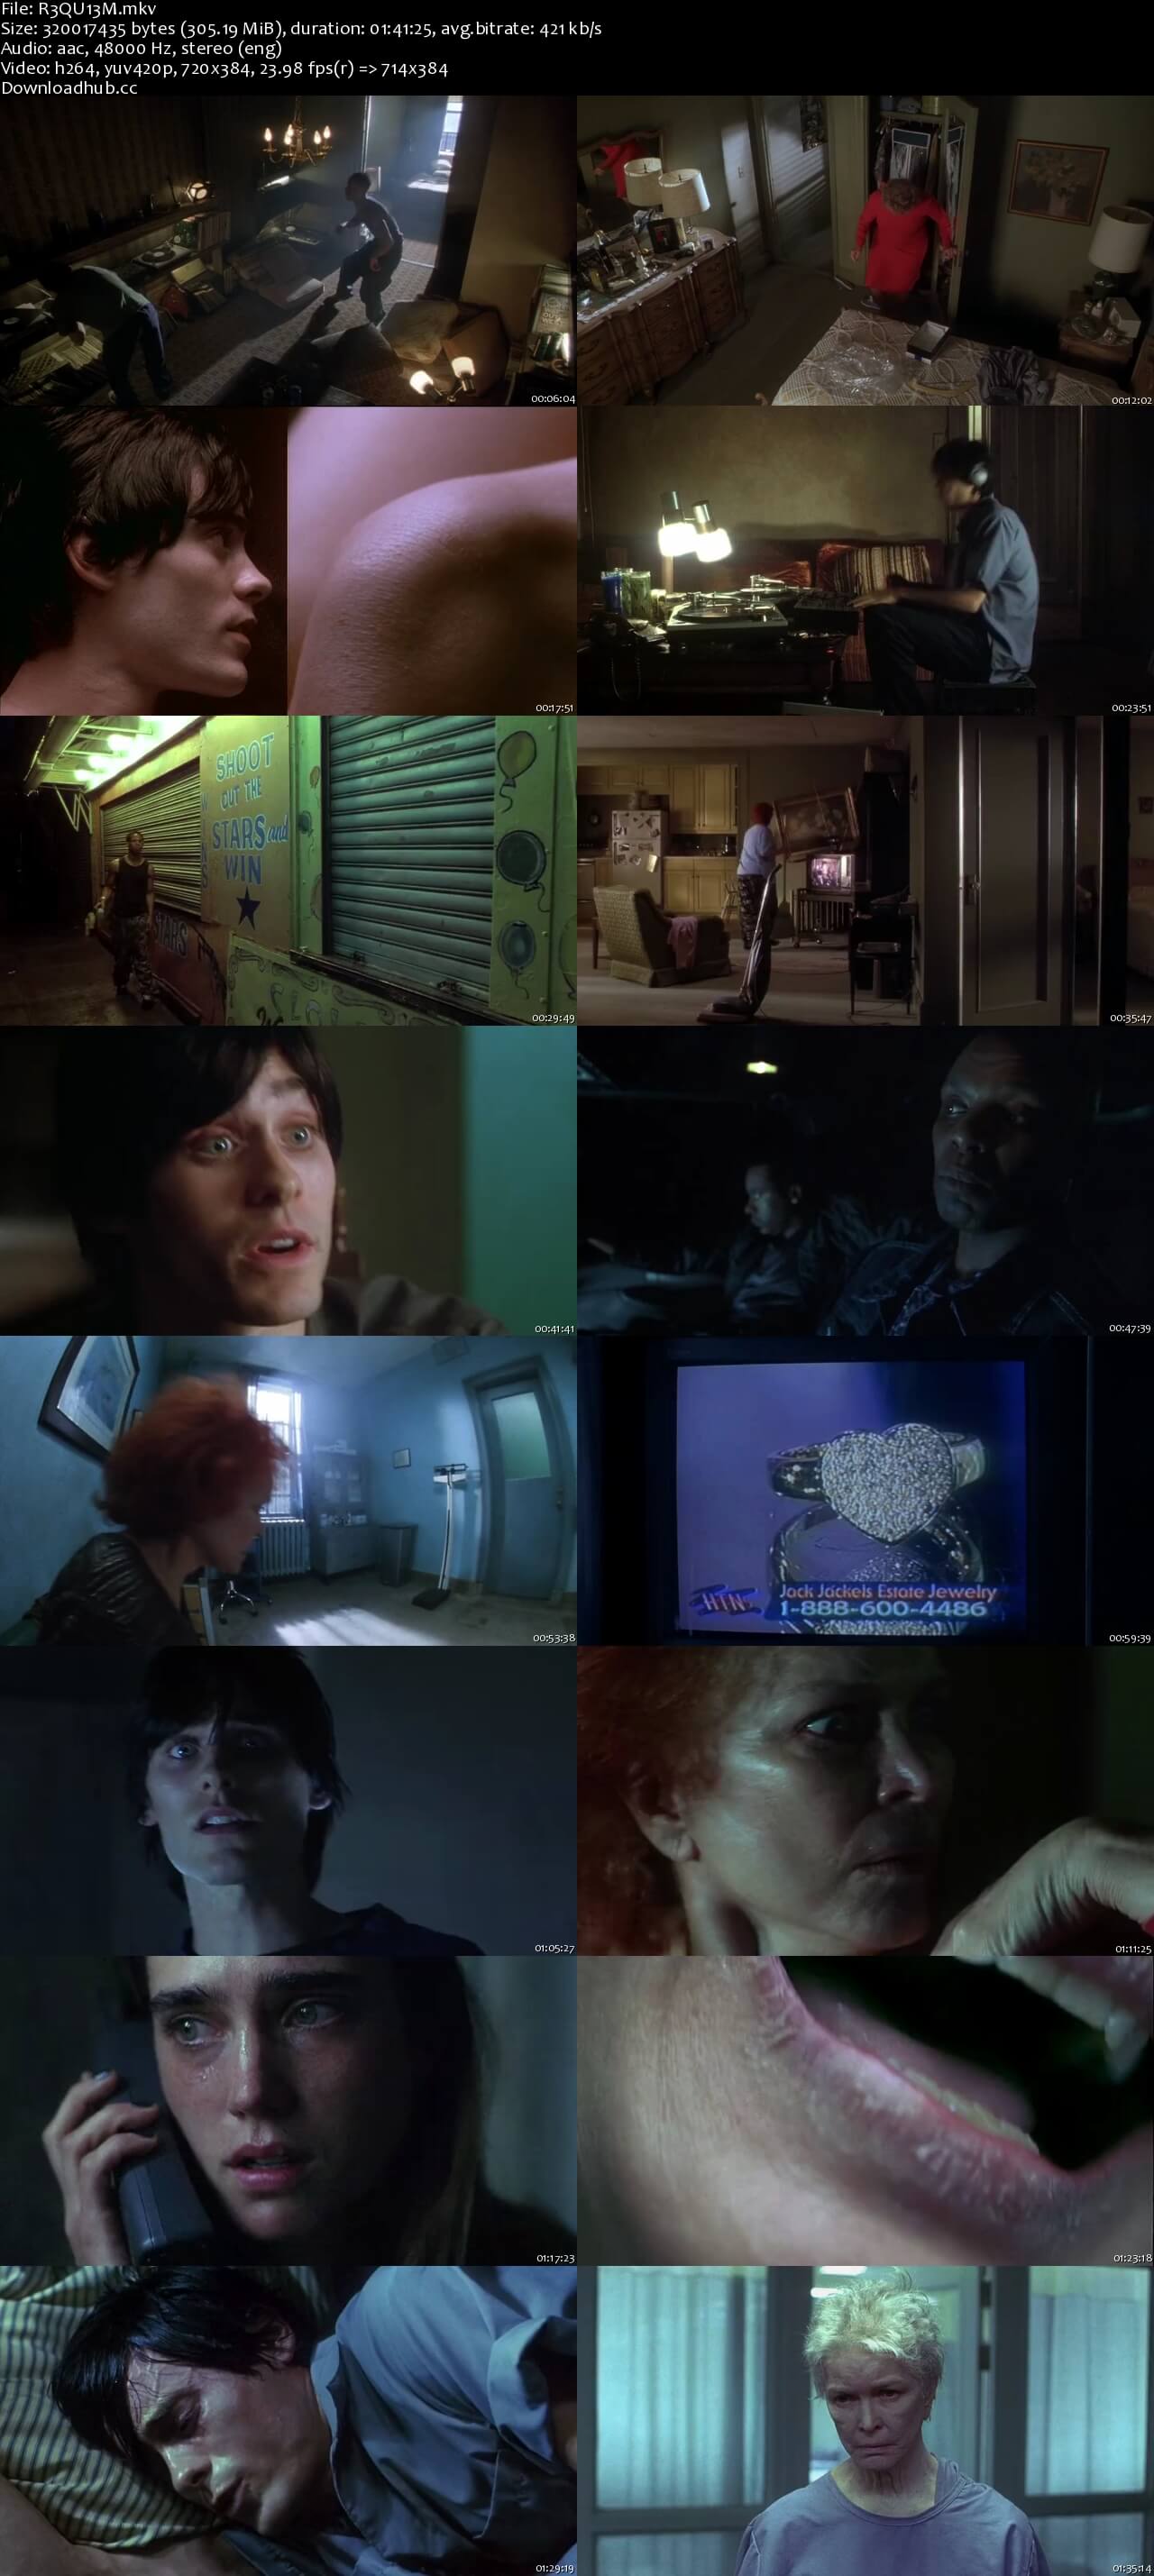 Amazing Requiem For A Dream Pictures & Backgrounds